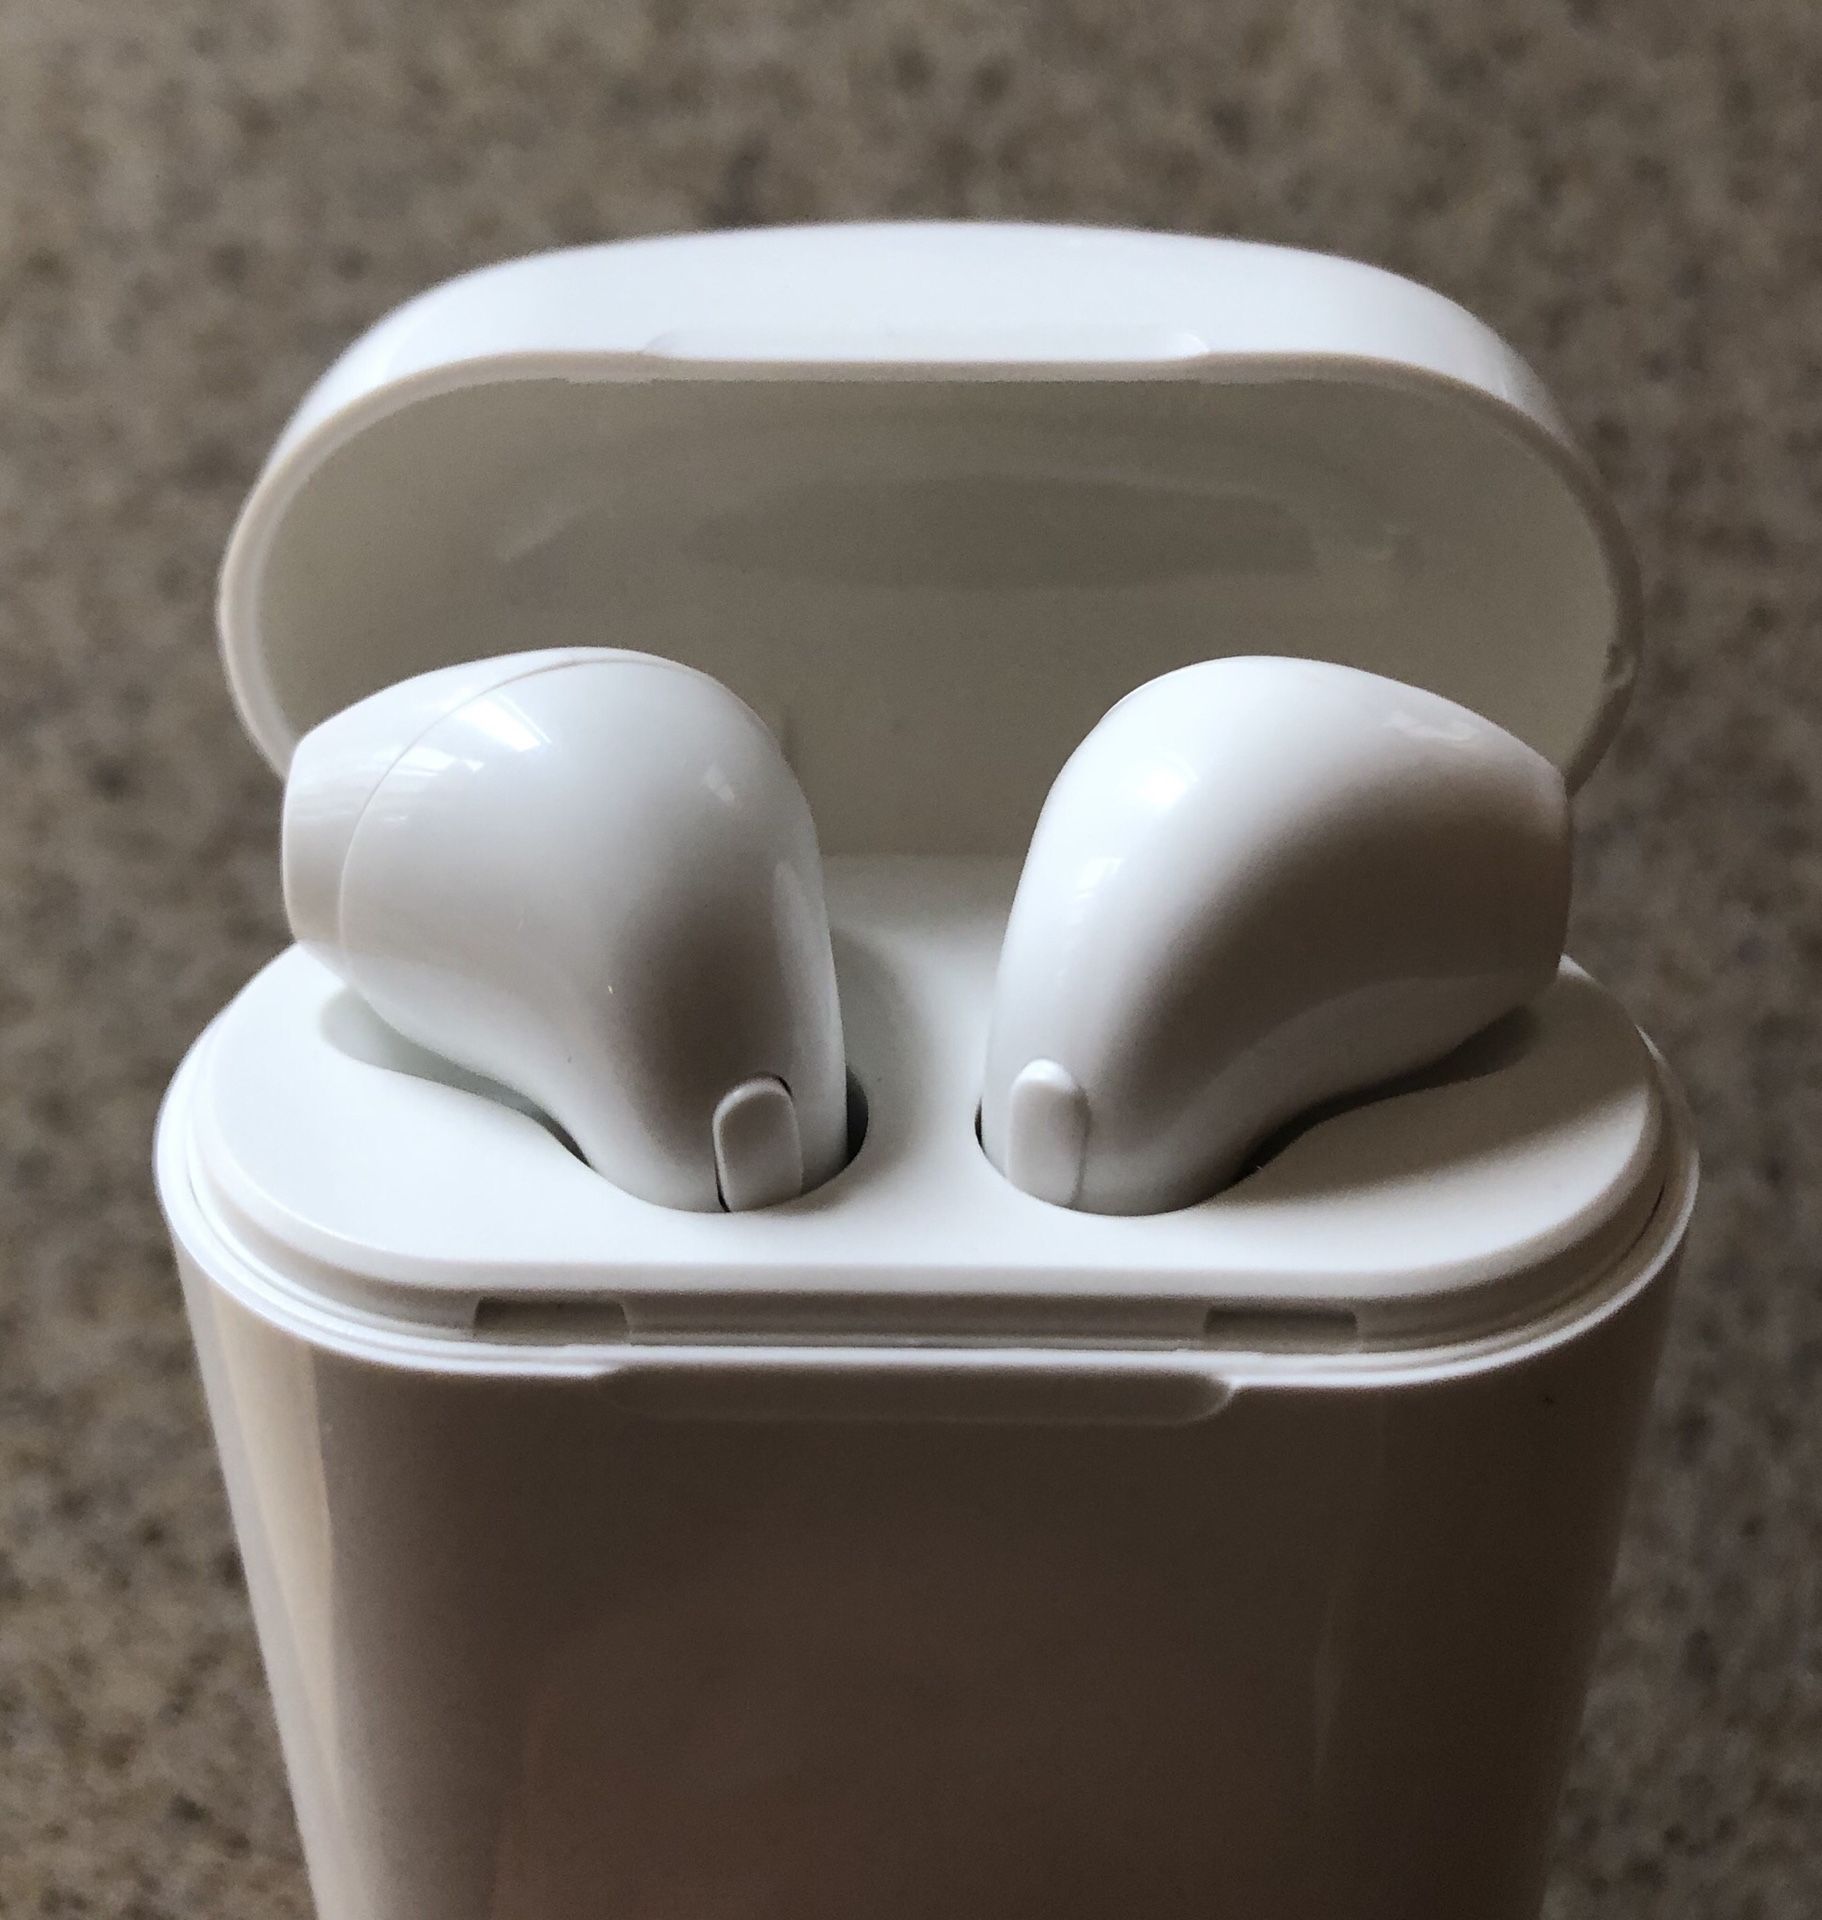 Wireless Bluetooth earbuds/headphones with charging case